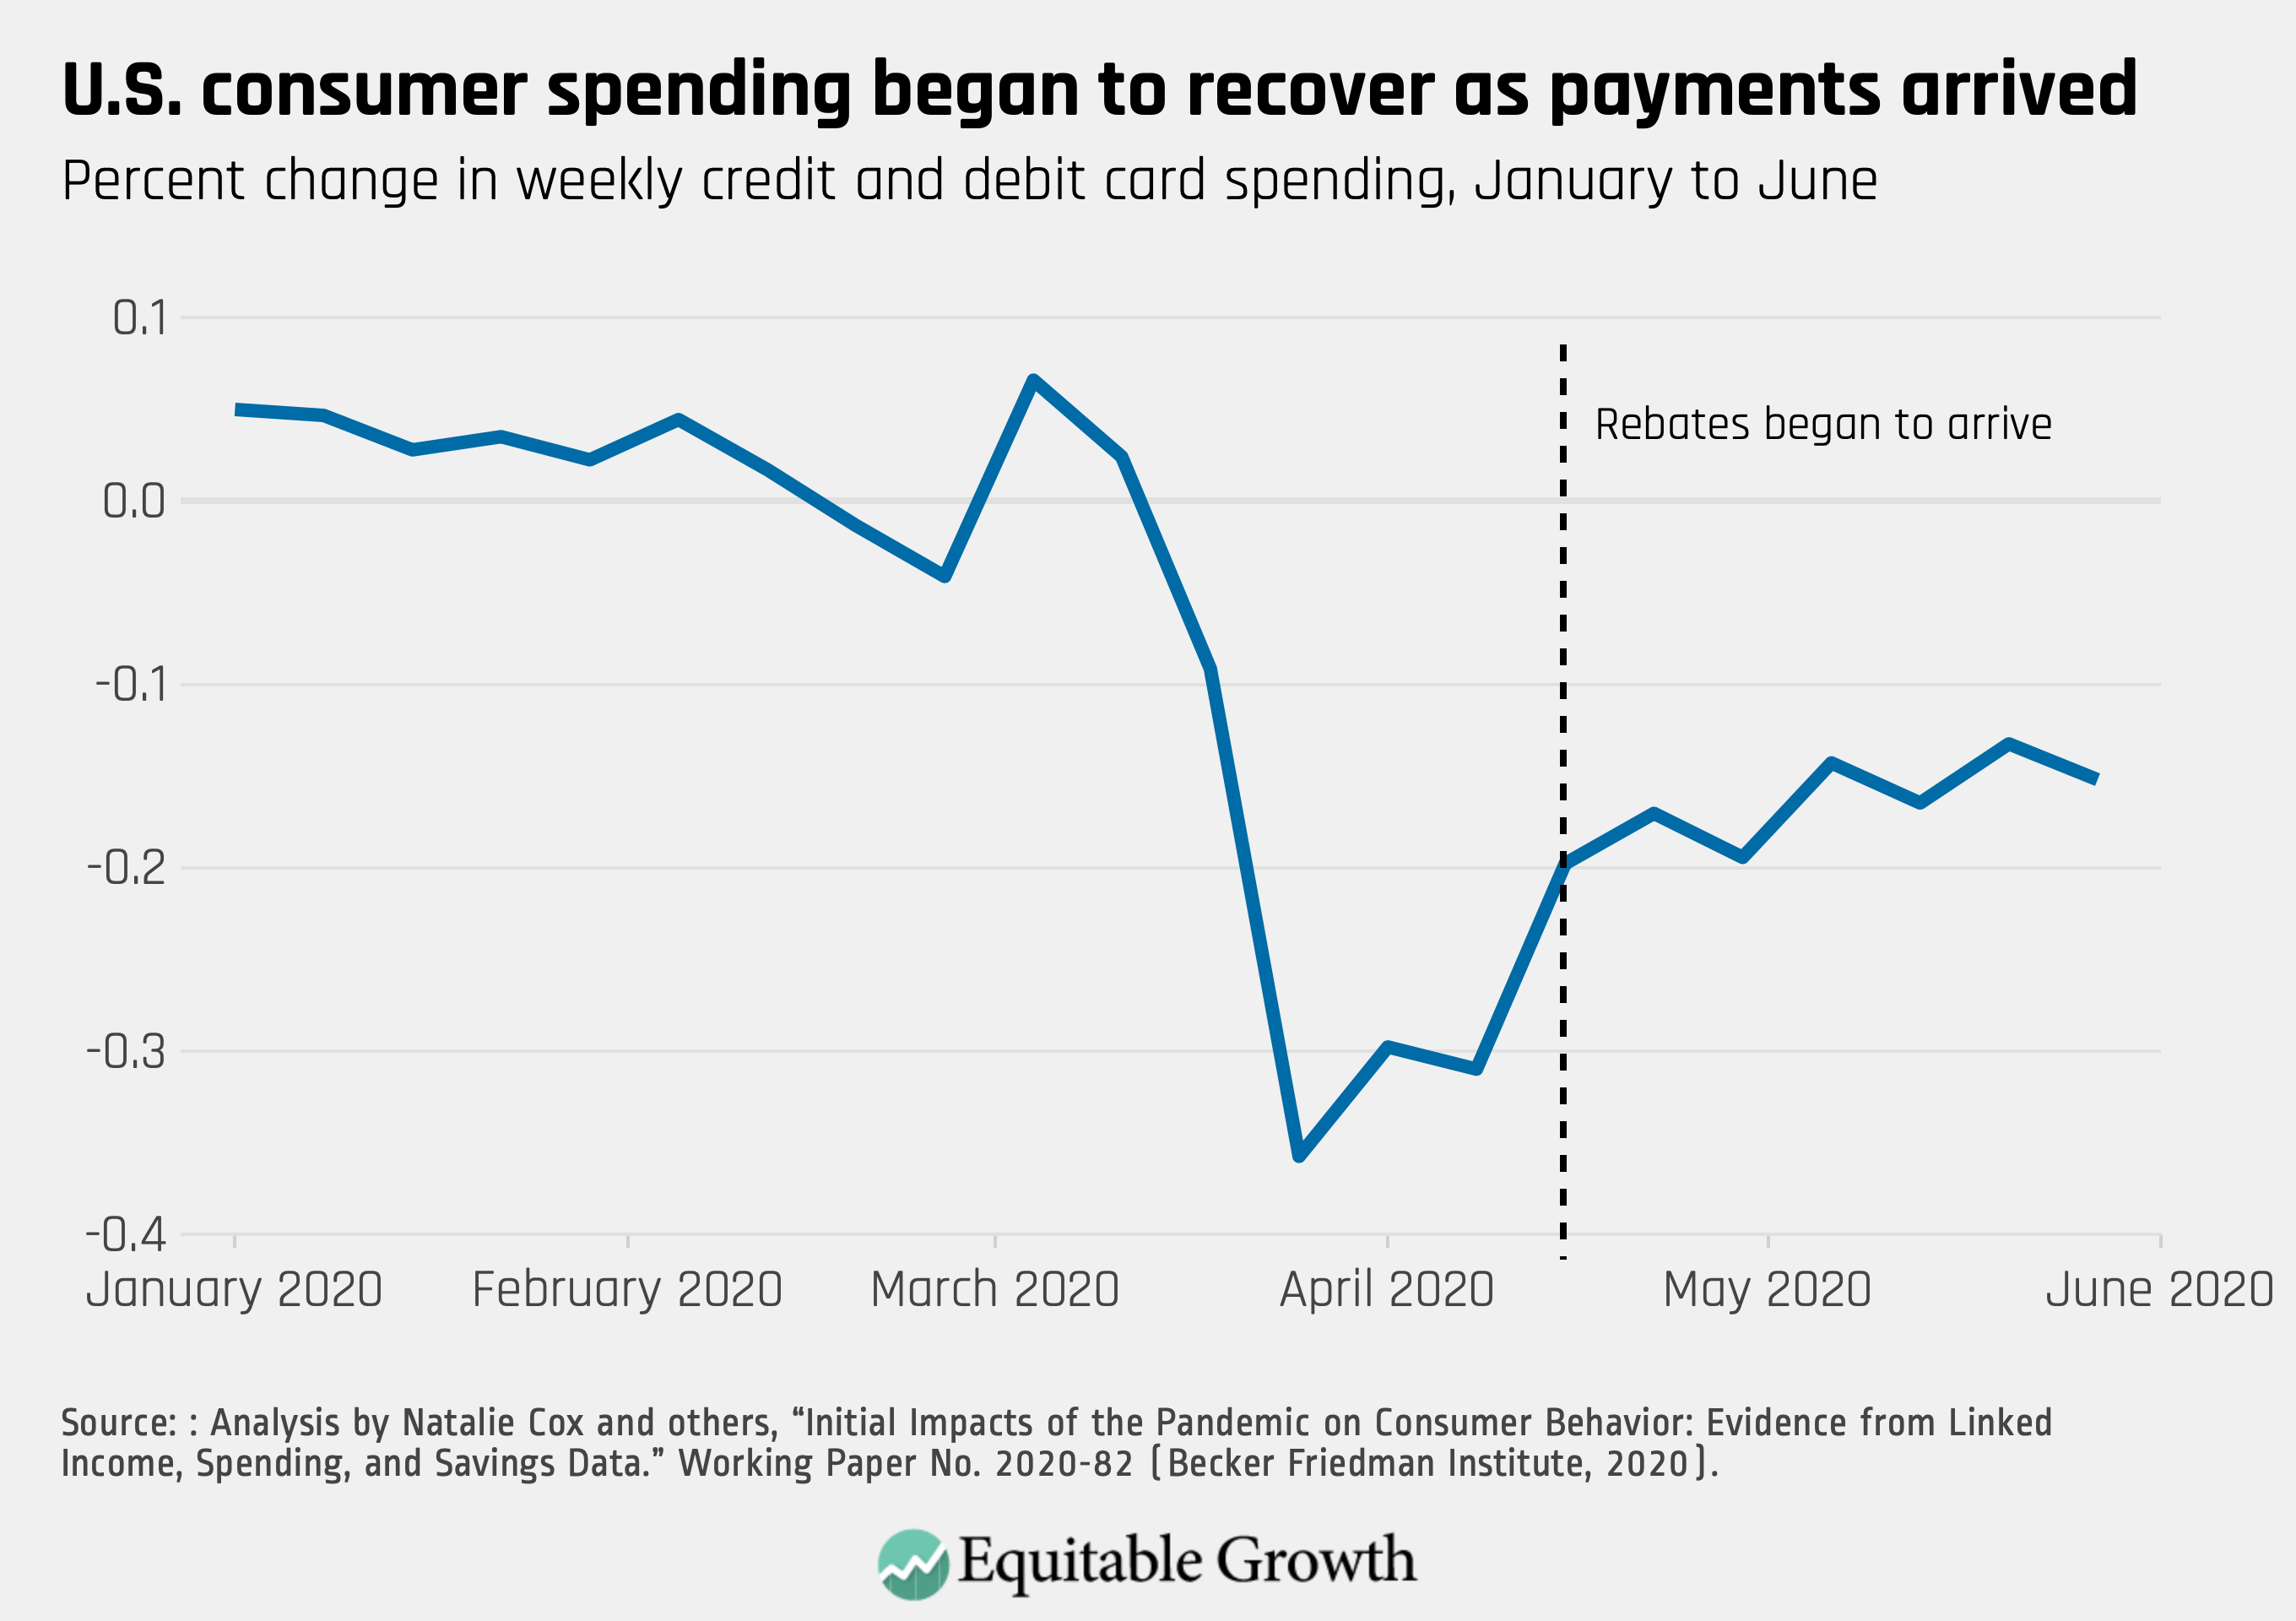 U.S. consumer spending began to recover as payments arrived Equitable